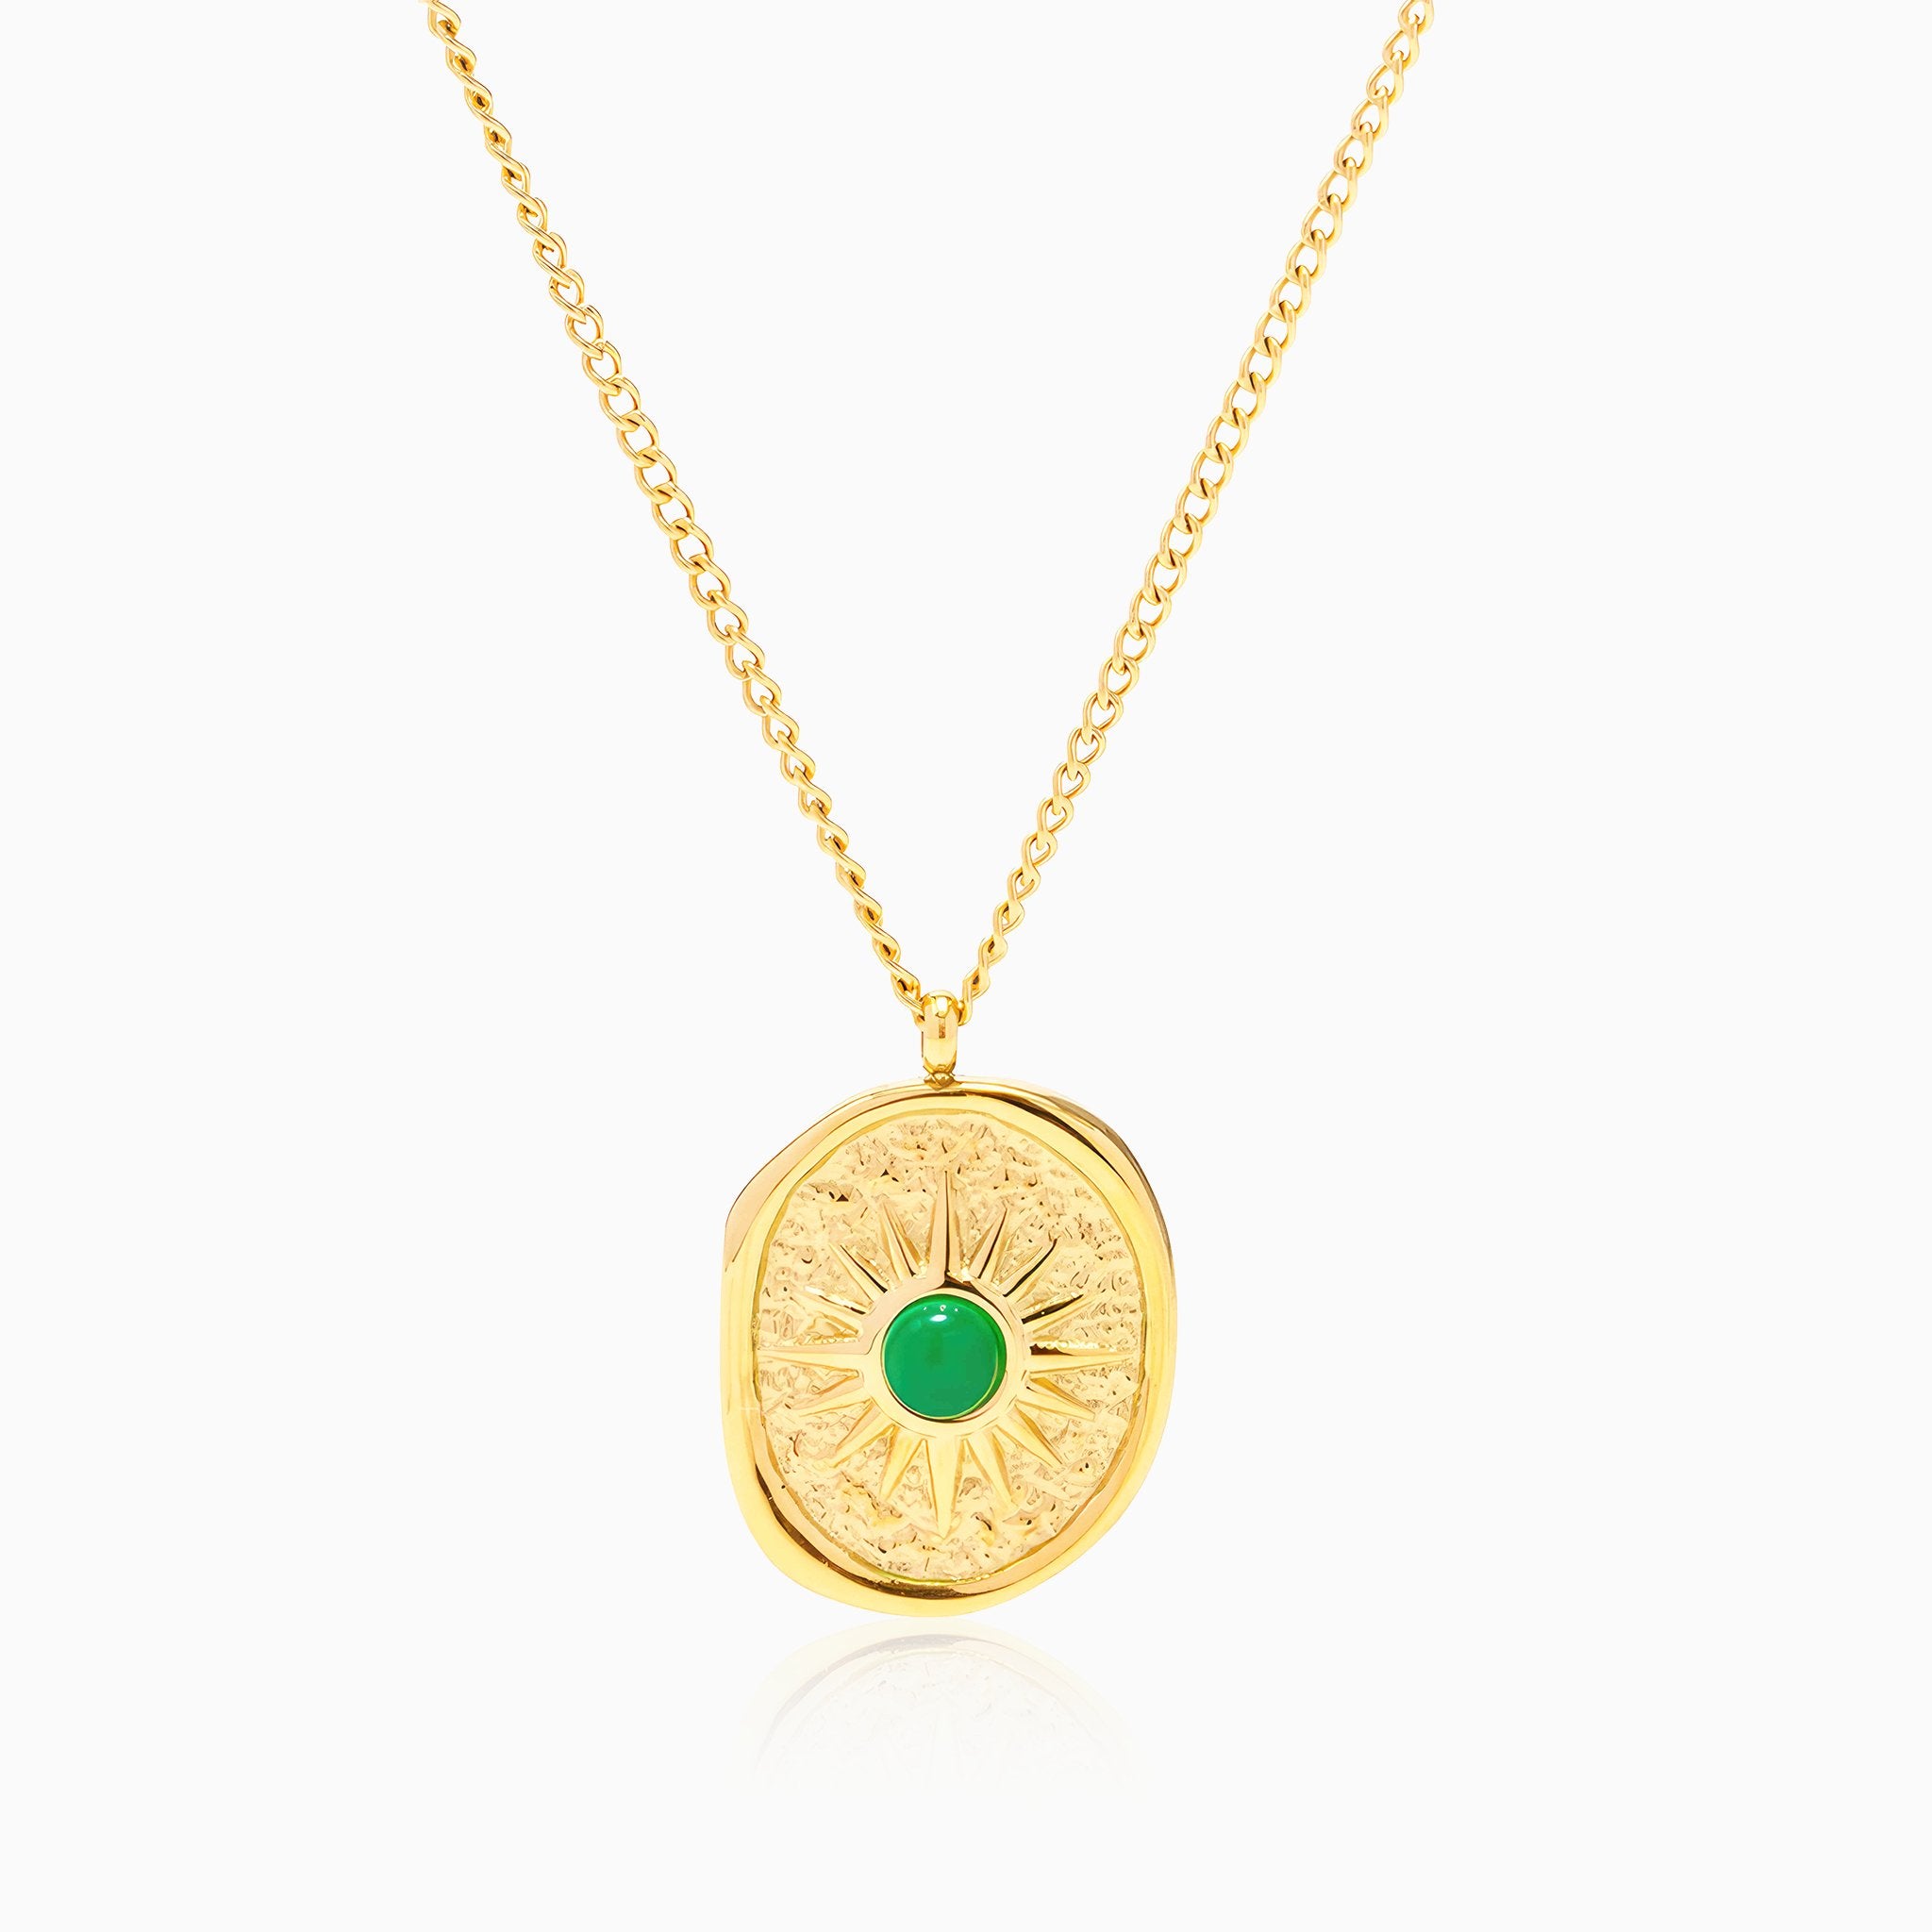 Emerald Inlaid Pendant Necklace - Nobbier - Necklace - 18K Gold And Titanium PVD Coated Jewelry